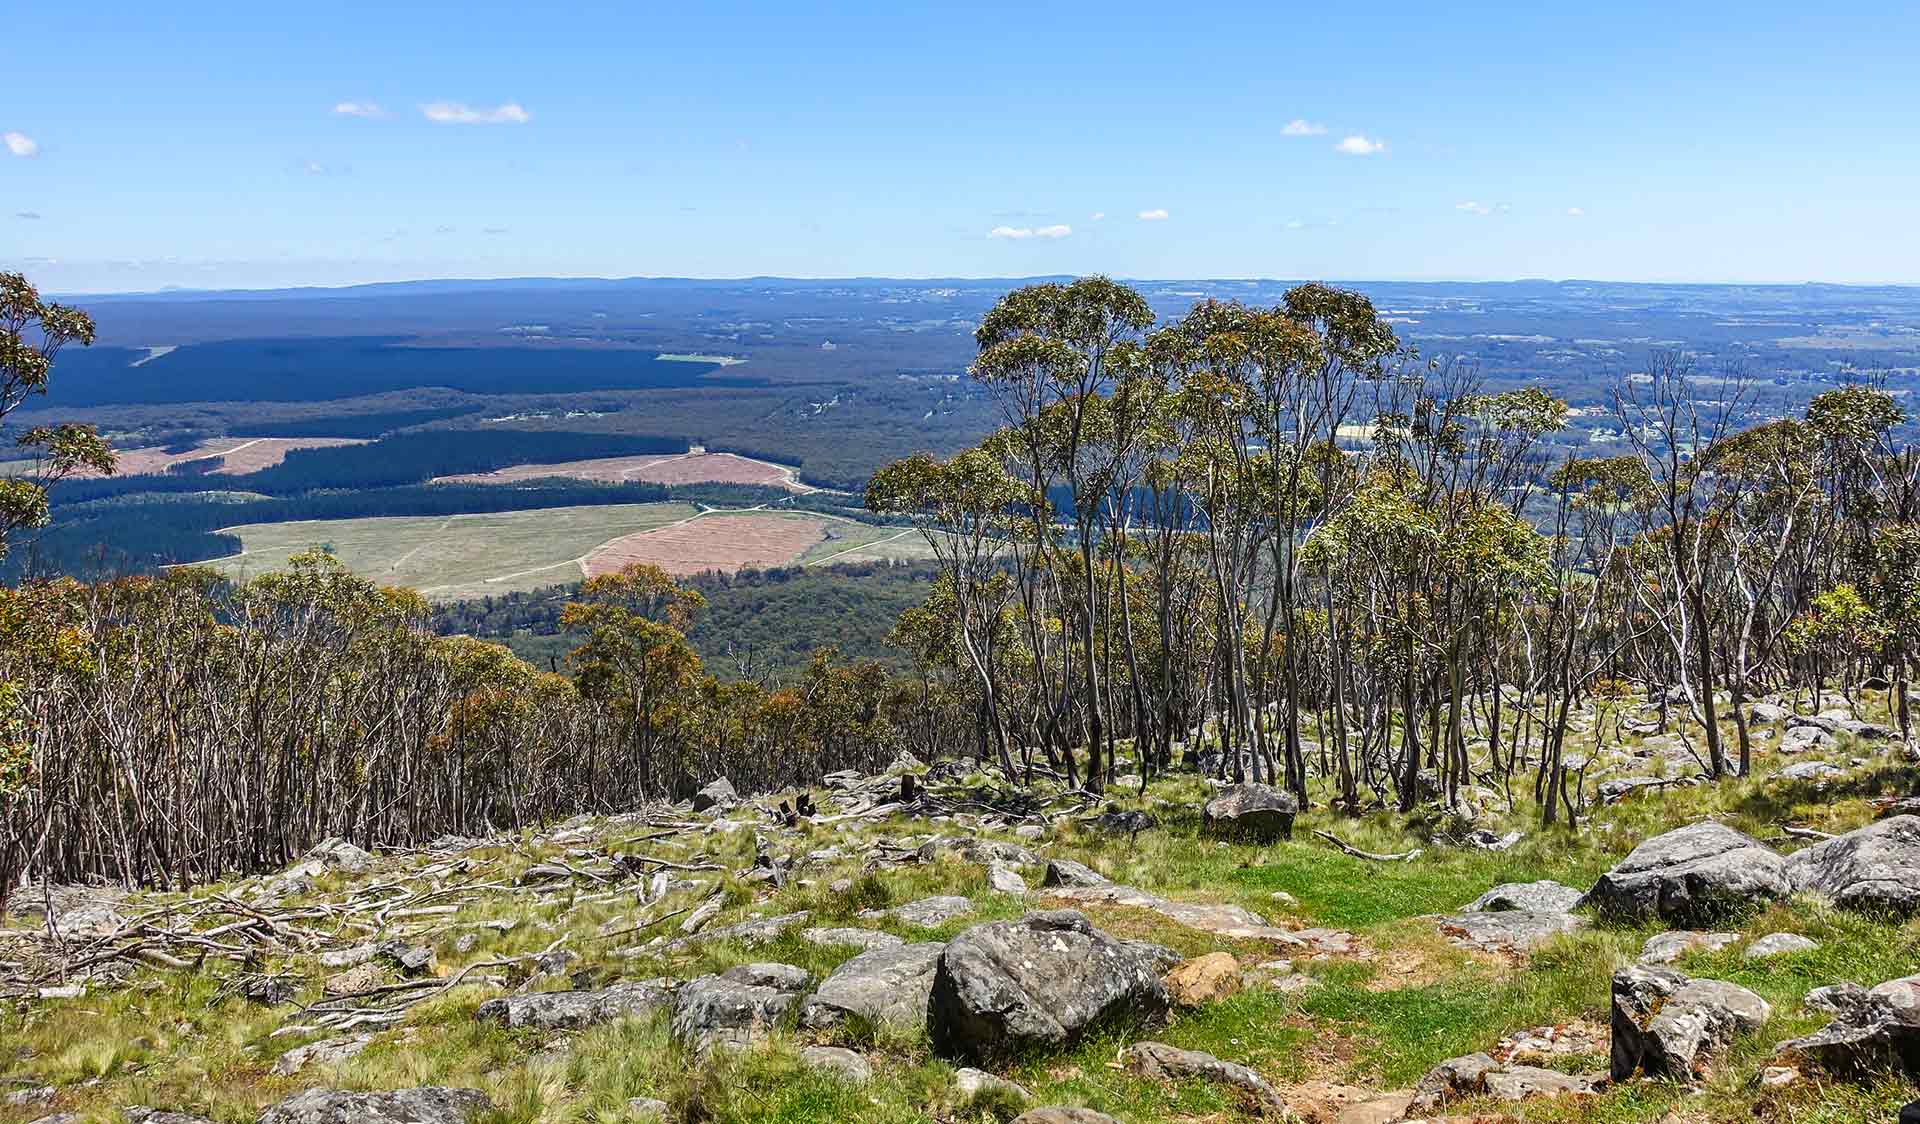 The view of the surrounding flats from near the summit of Mount Macedon